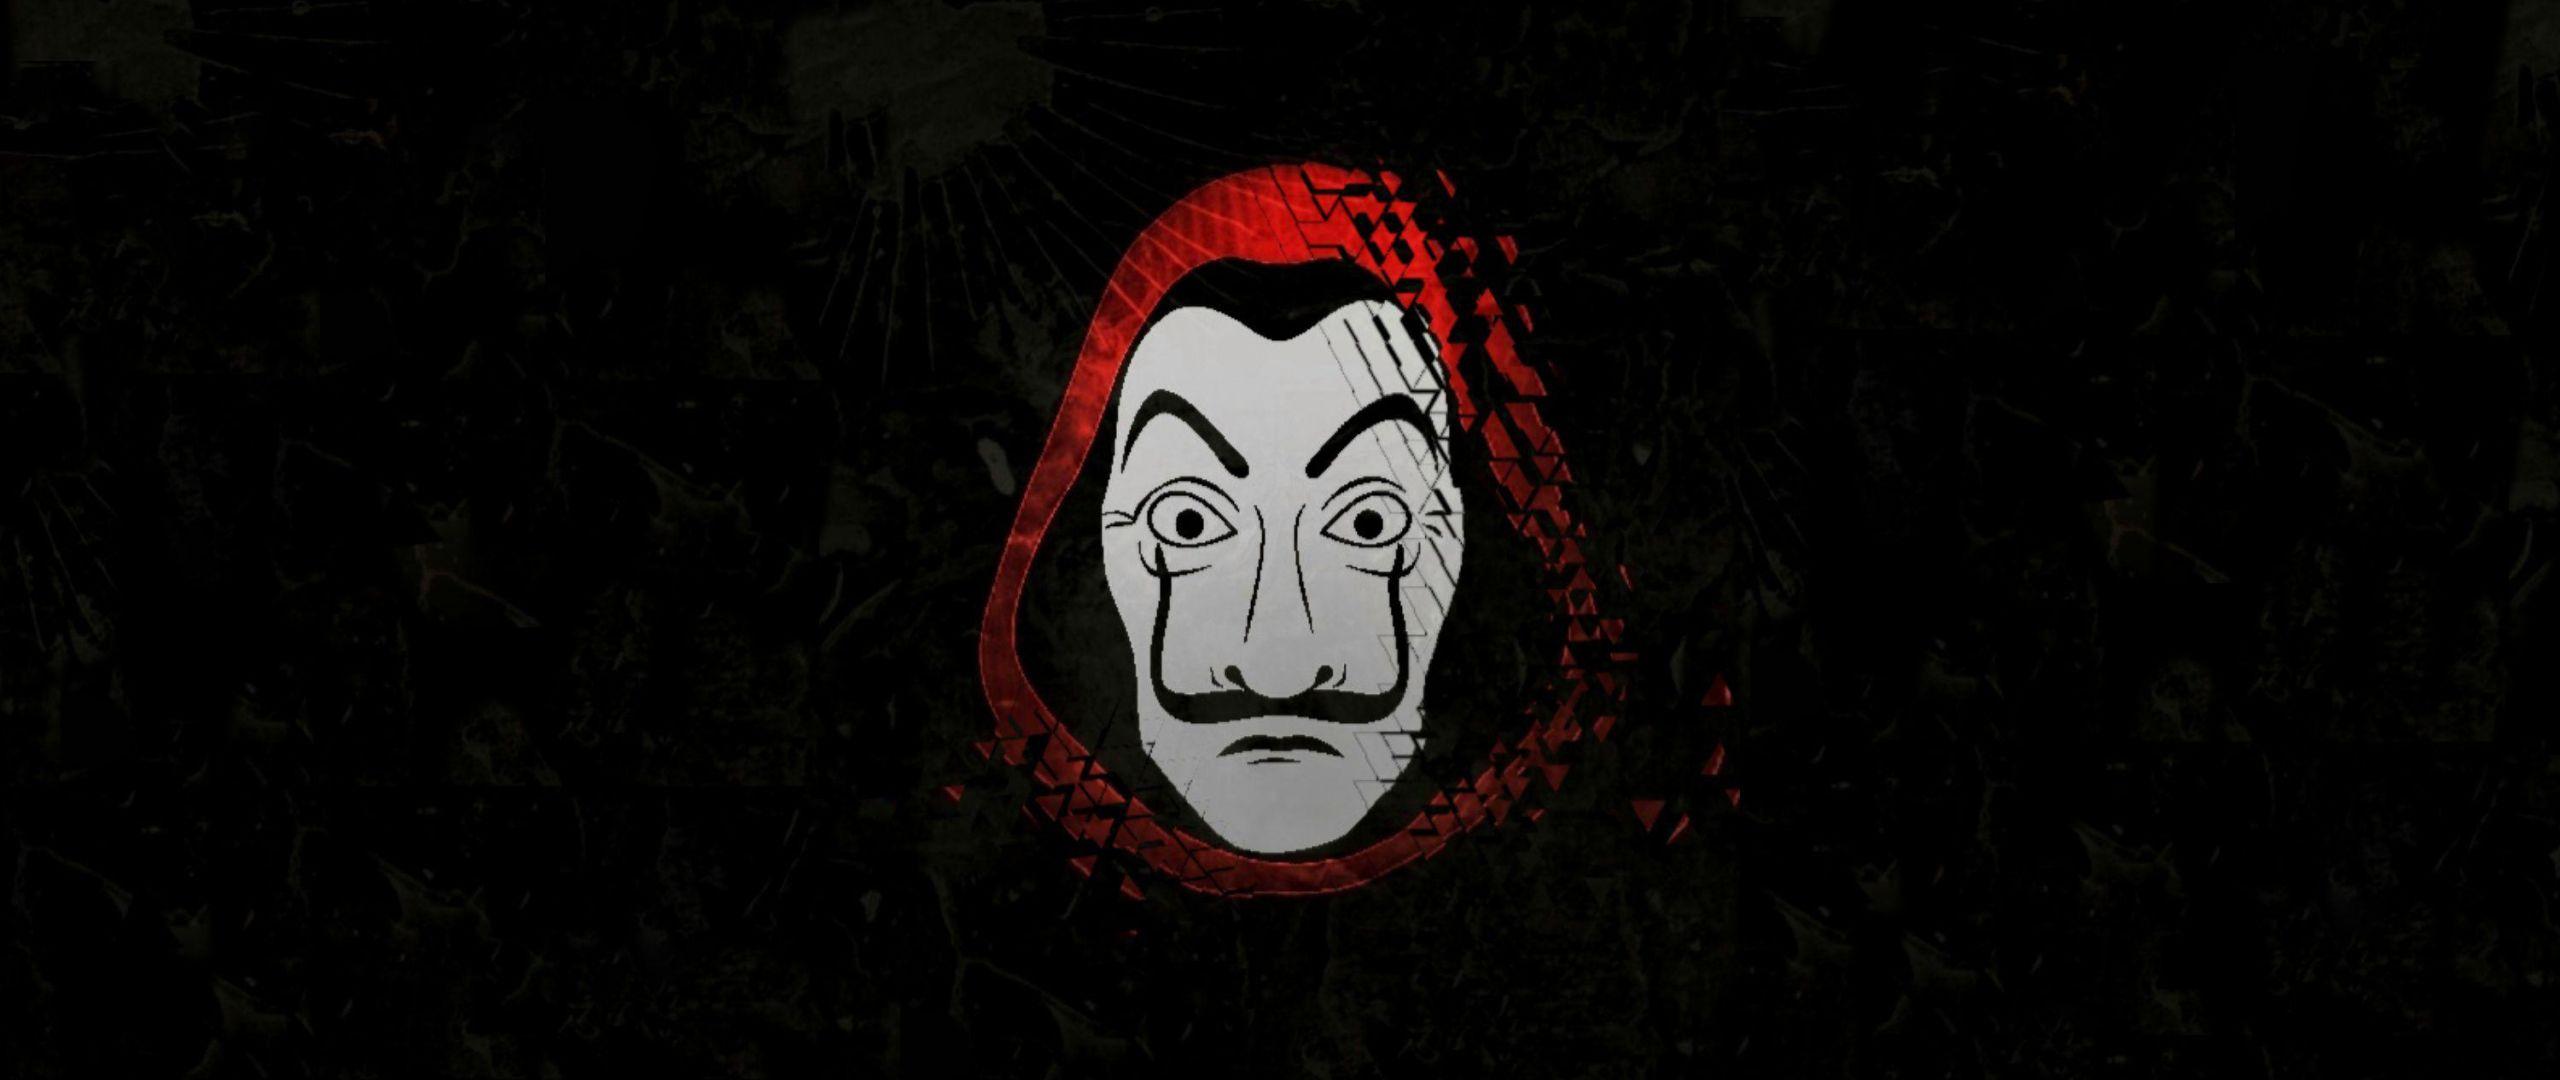 Money Heist Life Lessons: Major Life Lessons From Money Heist Series |  Times of India